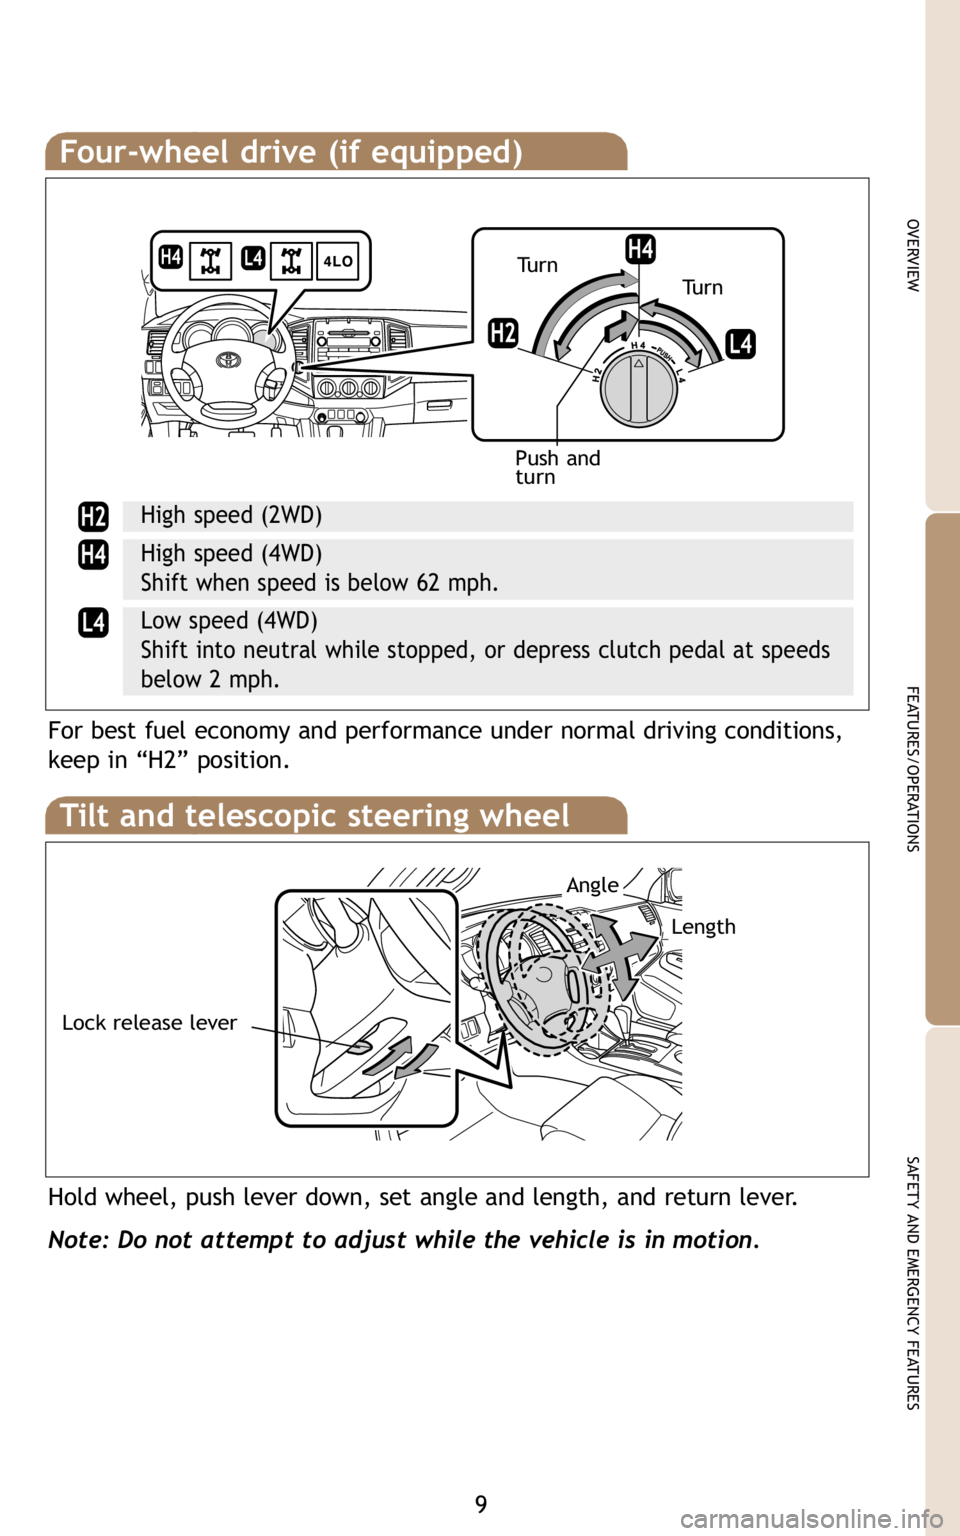 TOYOTA TACOMA 2009  Owners Manual (in English) 9
OVERVIEW
FEATURES/OPERATIONS
SAFETY AND EMERGENCY FEATURES
Four-wheel drive (if equipped)
High speed (2WD)
High speed (4WD)
Shift when speed is below 62 mph.
Low speed (4WD)
Shift into neutral while